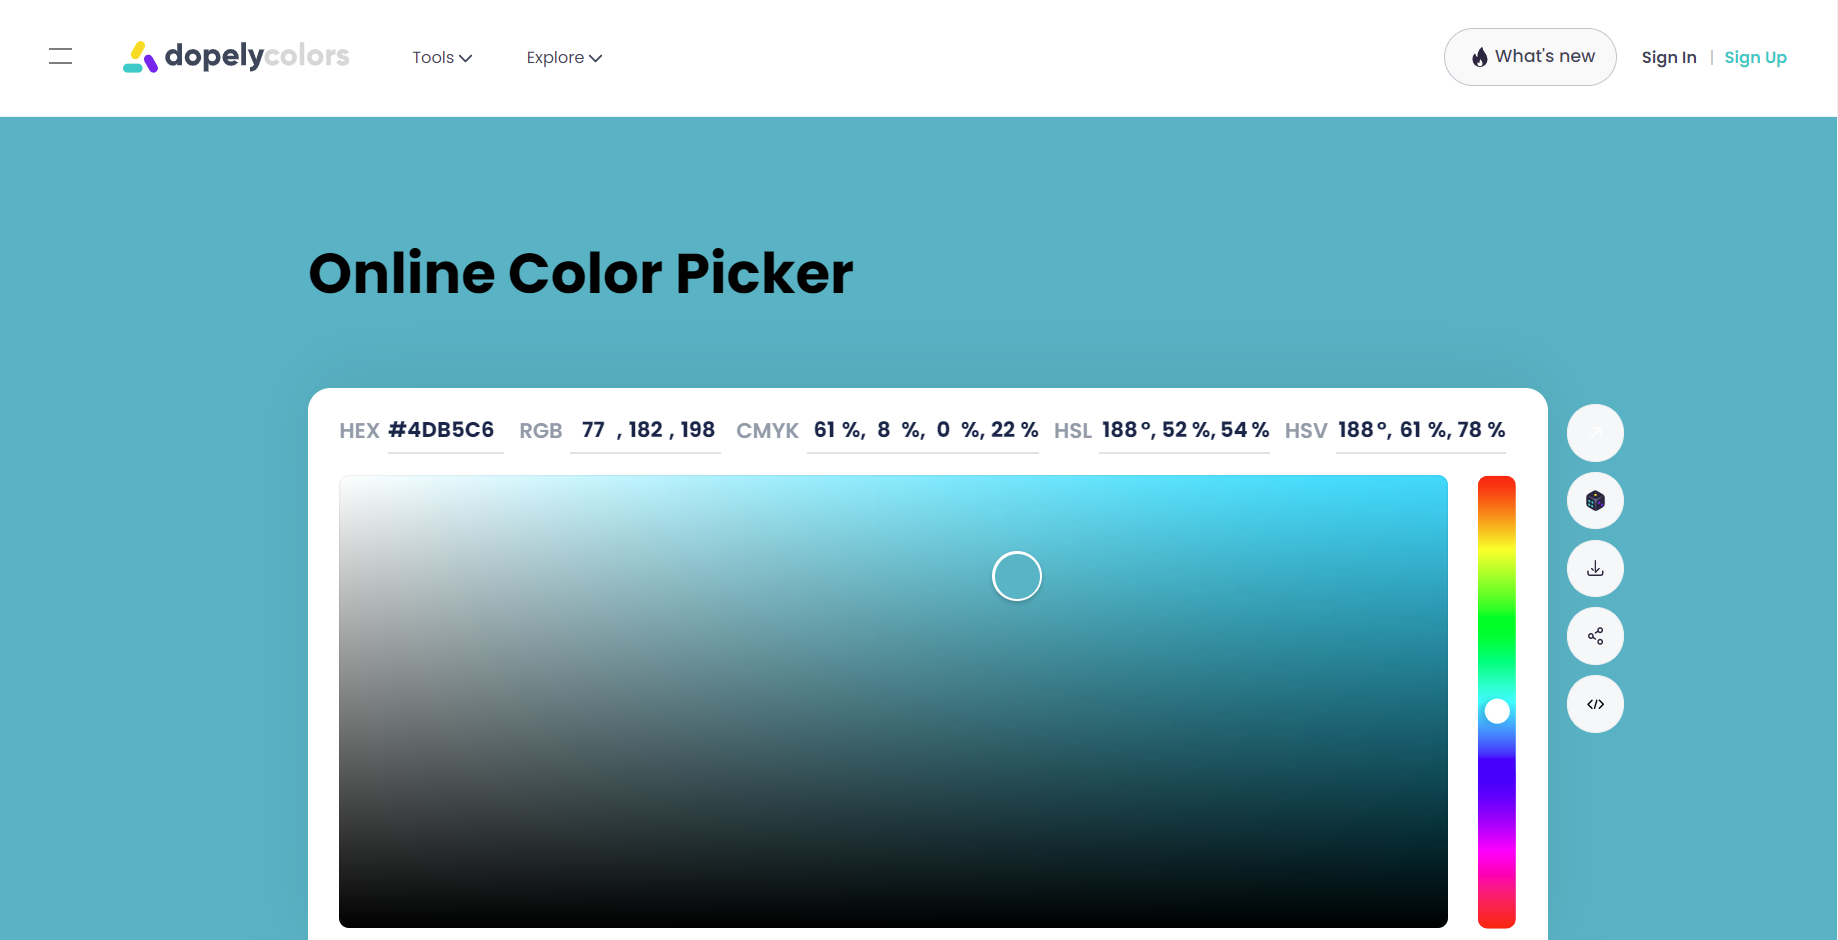  Dopely's online color picker tool helps you to pick the desired color from color wheel